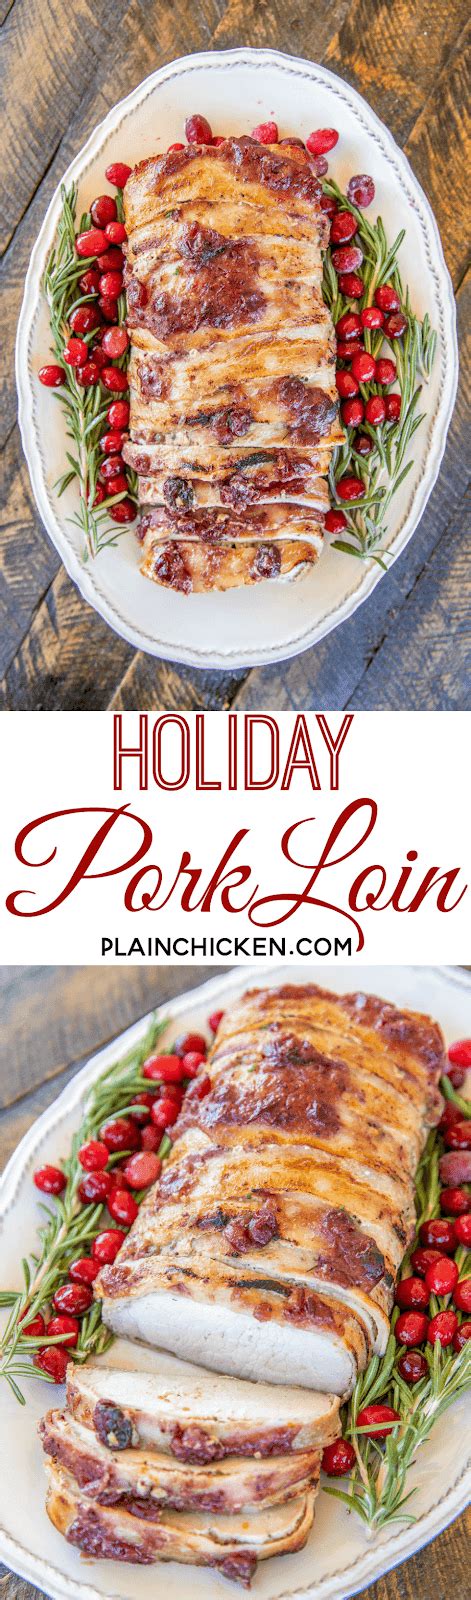 Step 2 cover, and cook on high for 4 hours, or on low for 8 hours. Slow Cooker Cranberry Orange Pork Loin | Plain Chicken®